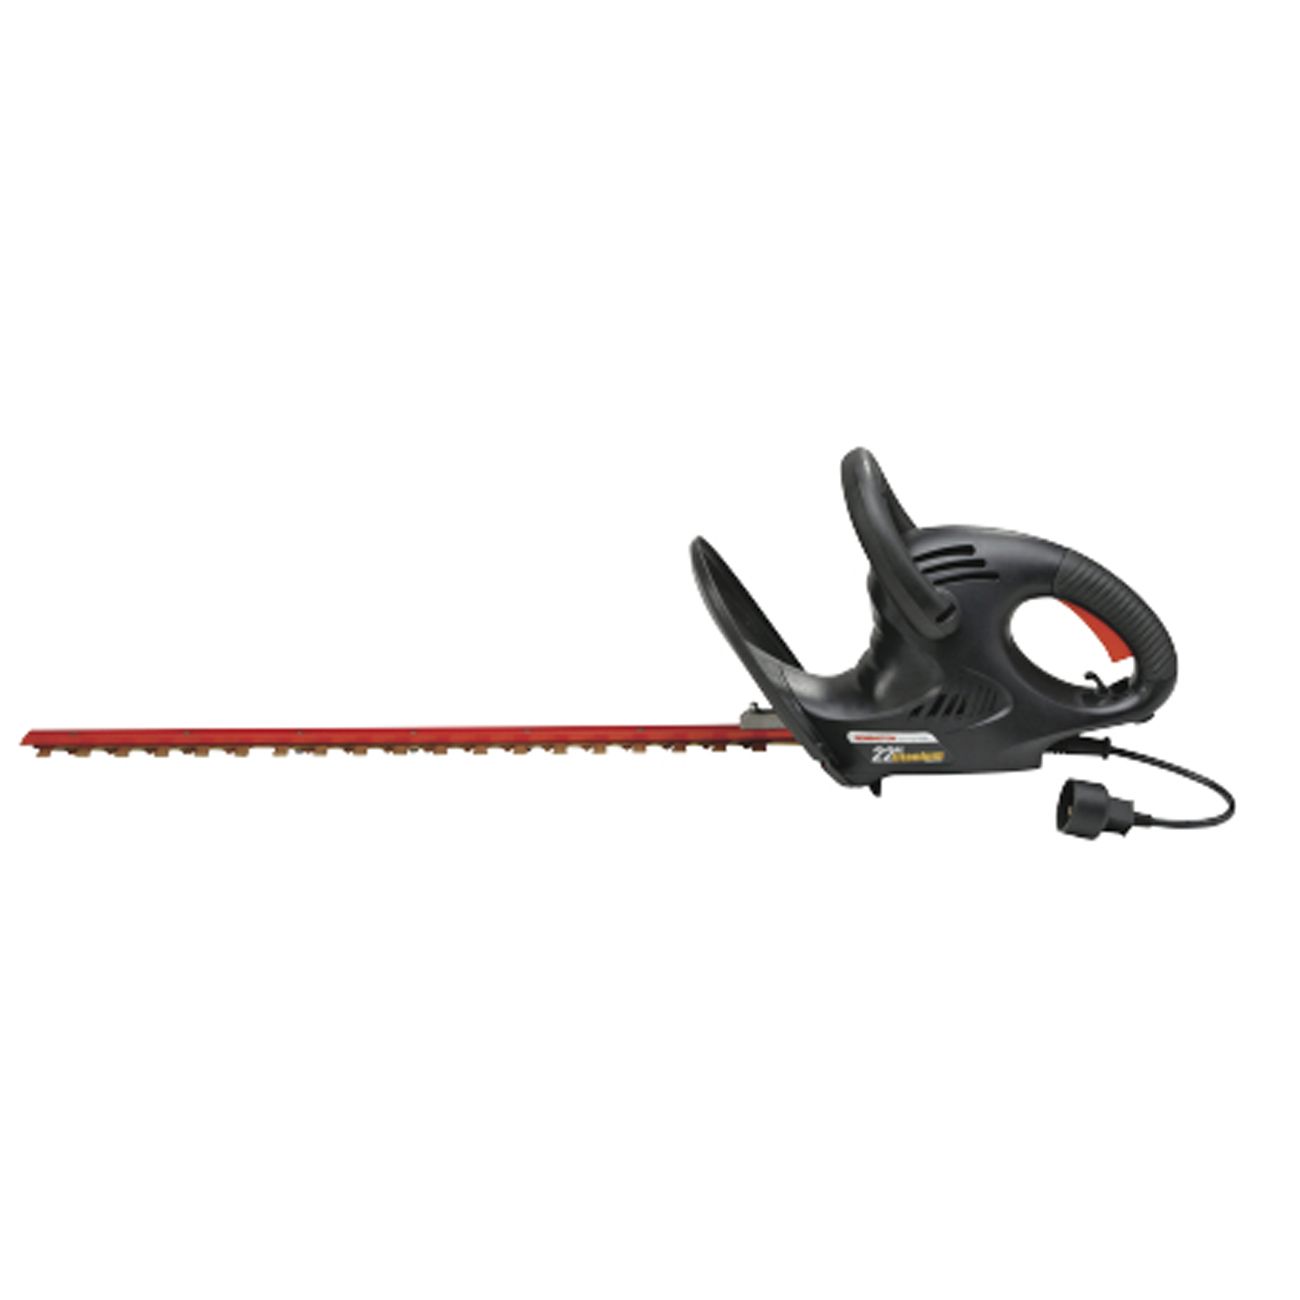 Electric Hedge Trimmer logo